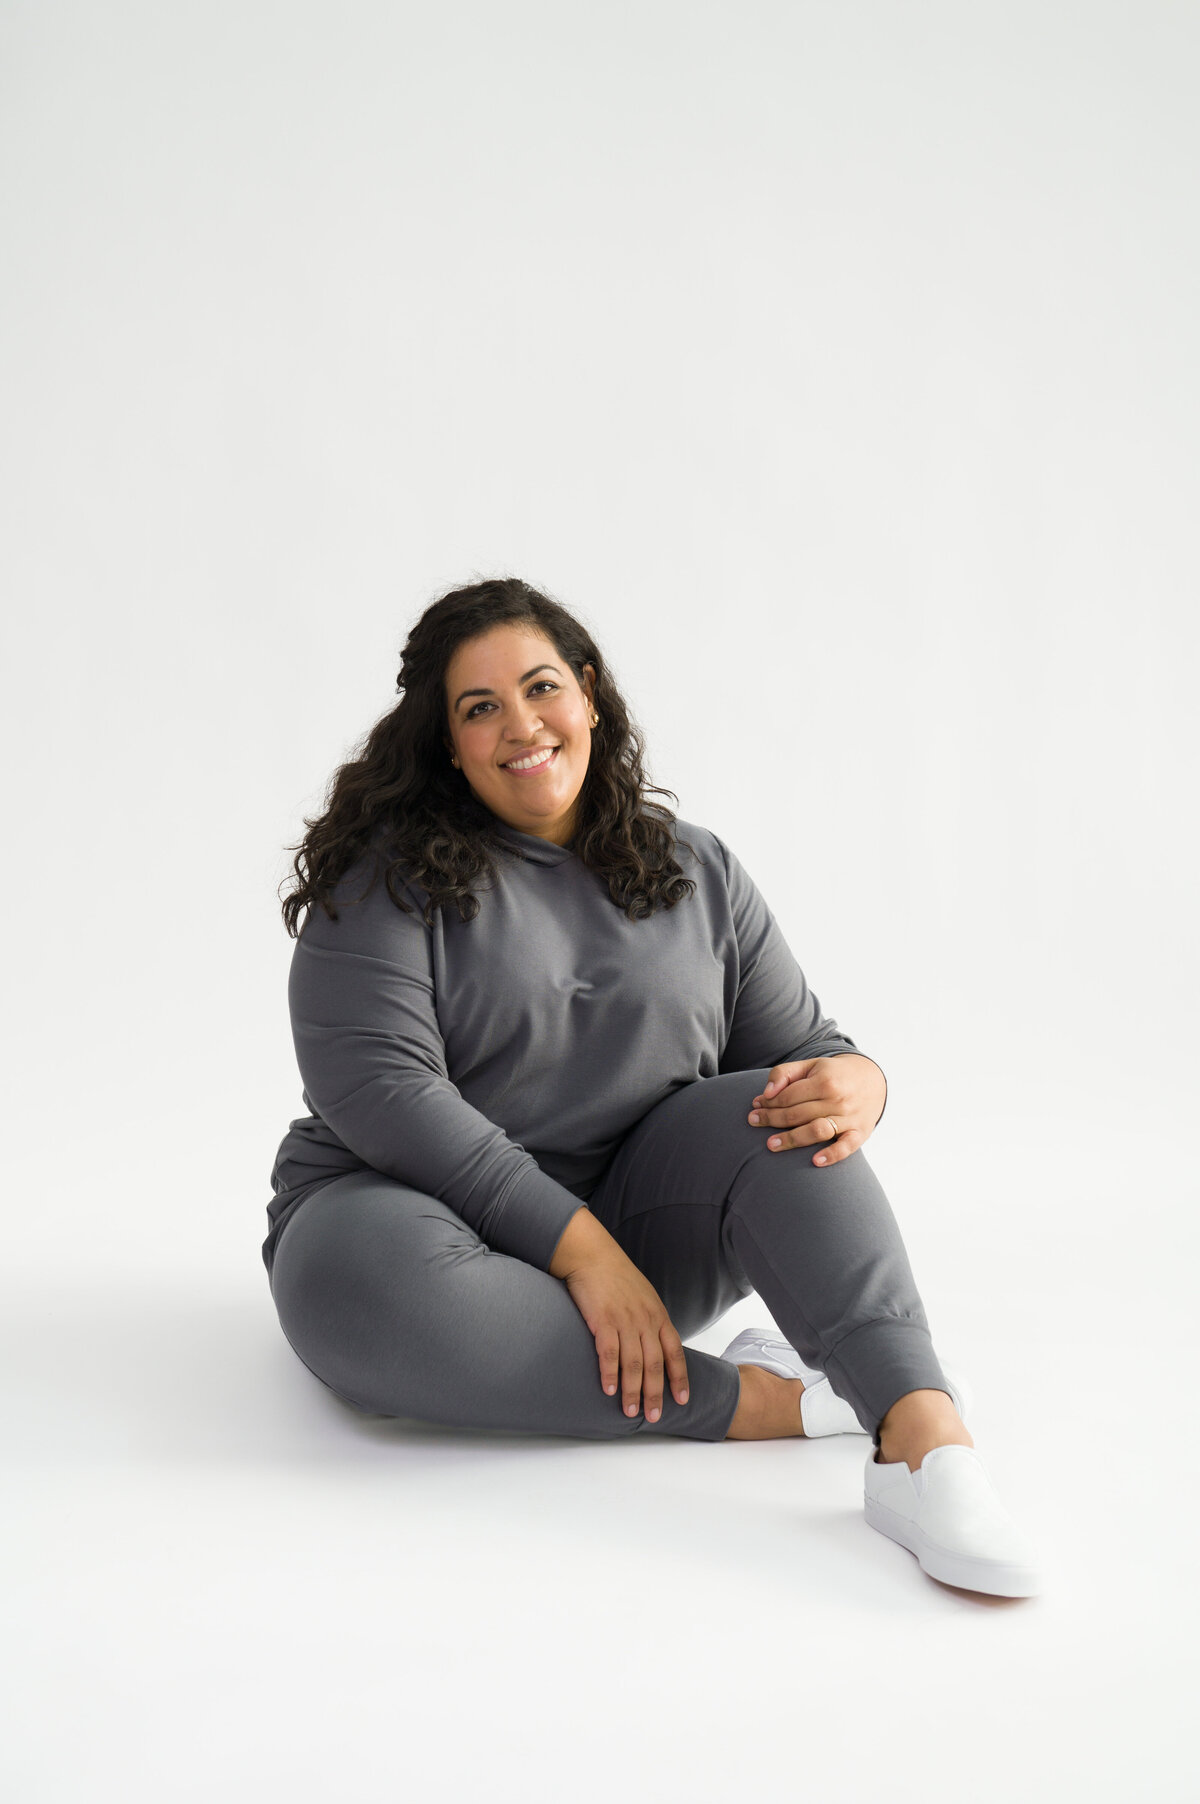 Woman sitting on floor with white background wearing grey joggers